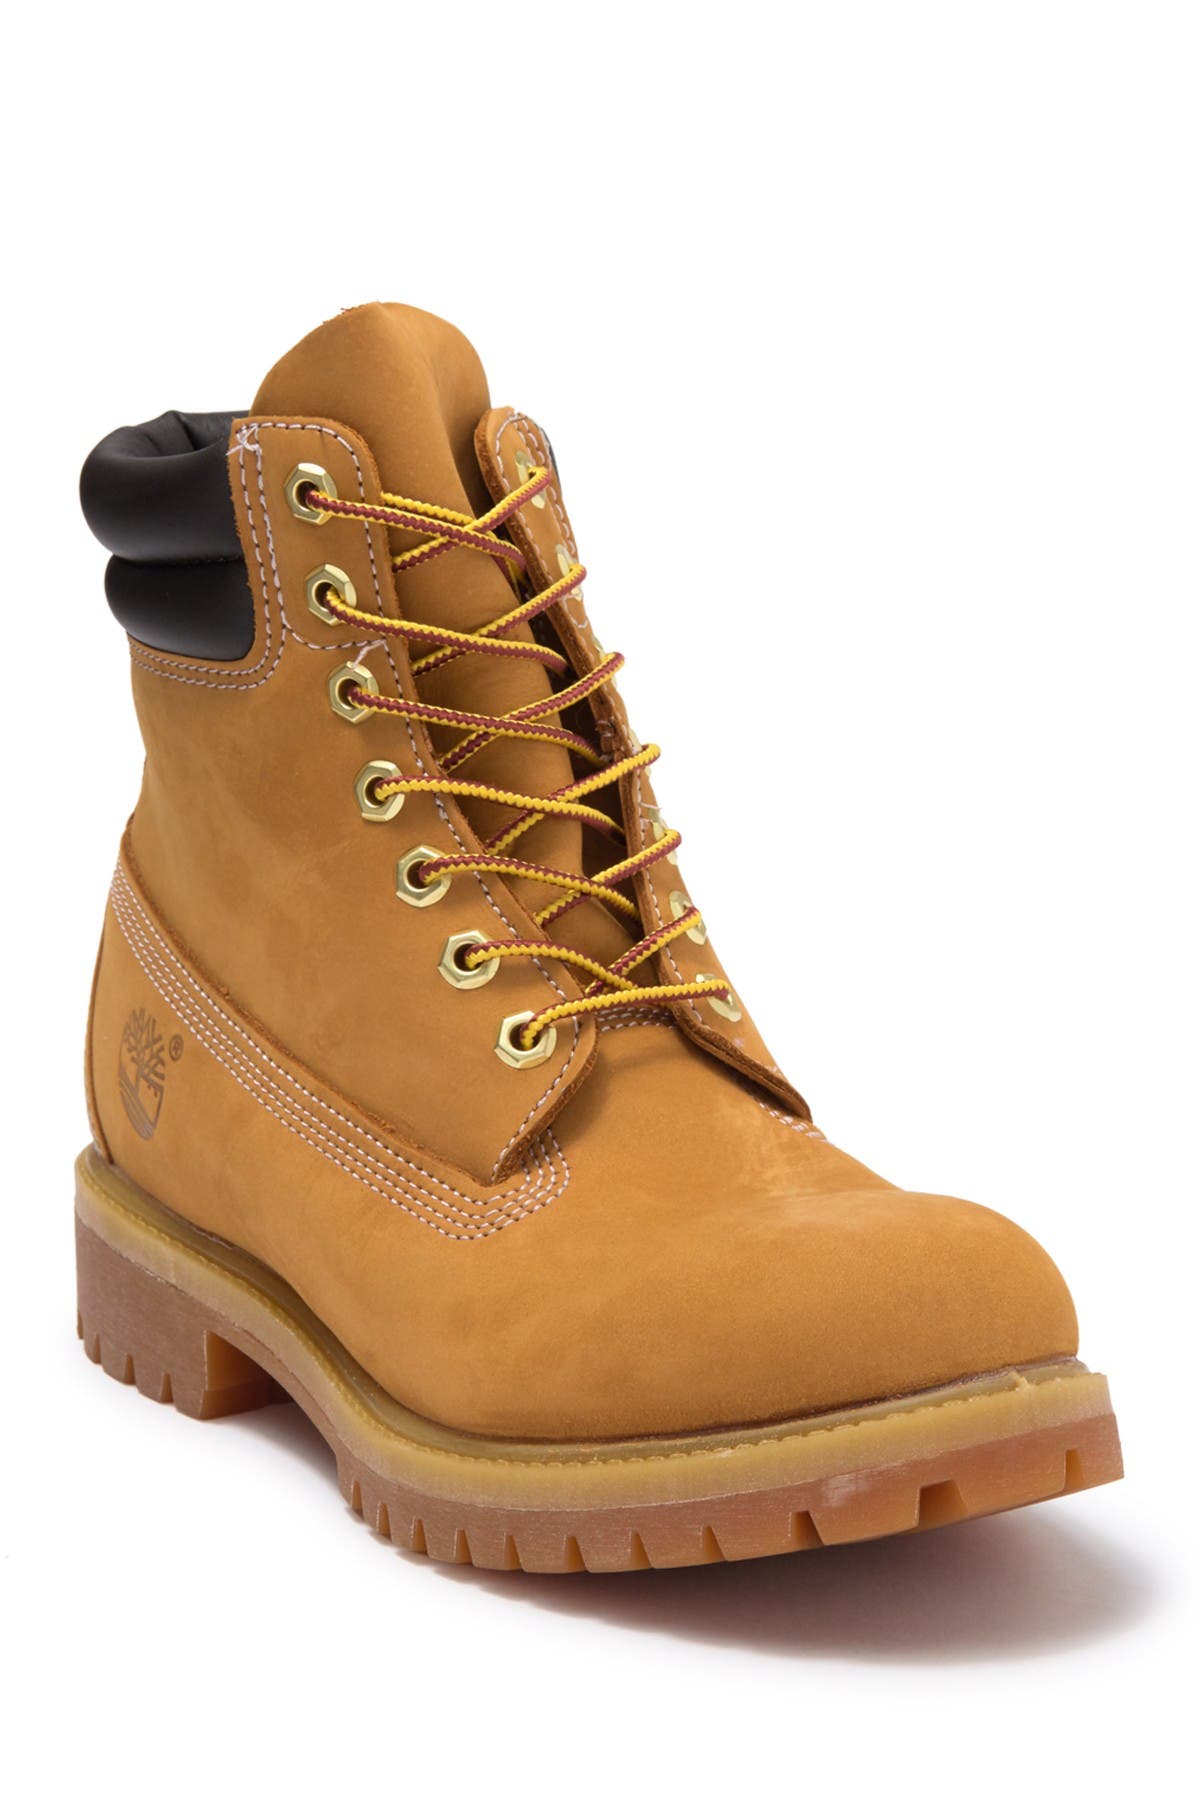 nordstrom rack timberland boots